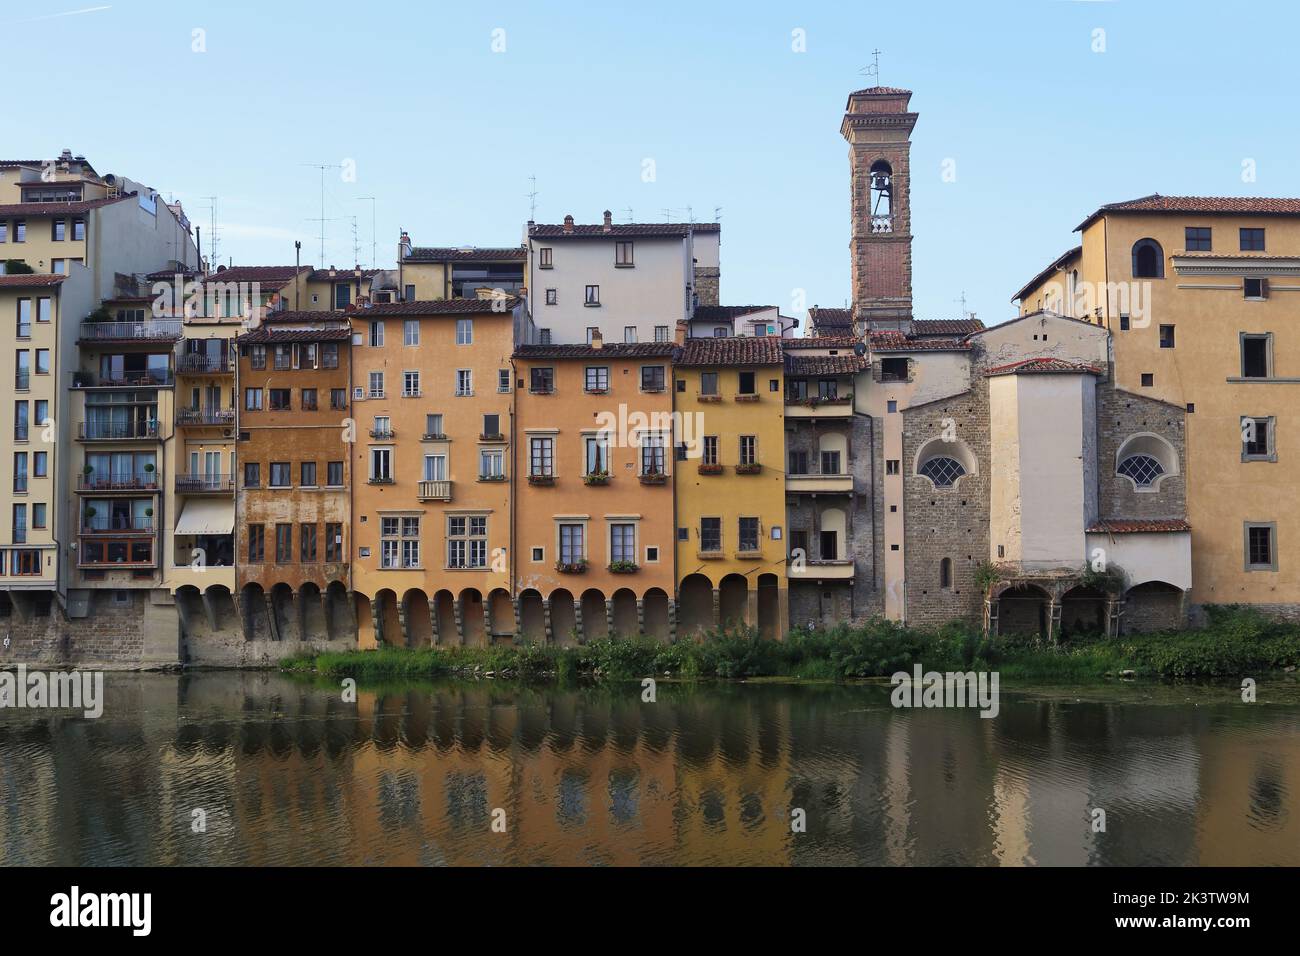 FLORENCE, ITALY - SEPTEMBER 18, 2019: These are historic medieval houses along the Arno River. Stock Photo